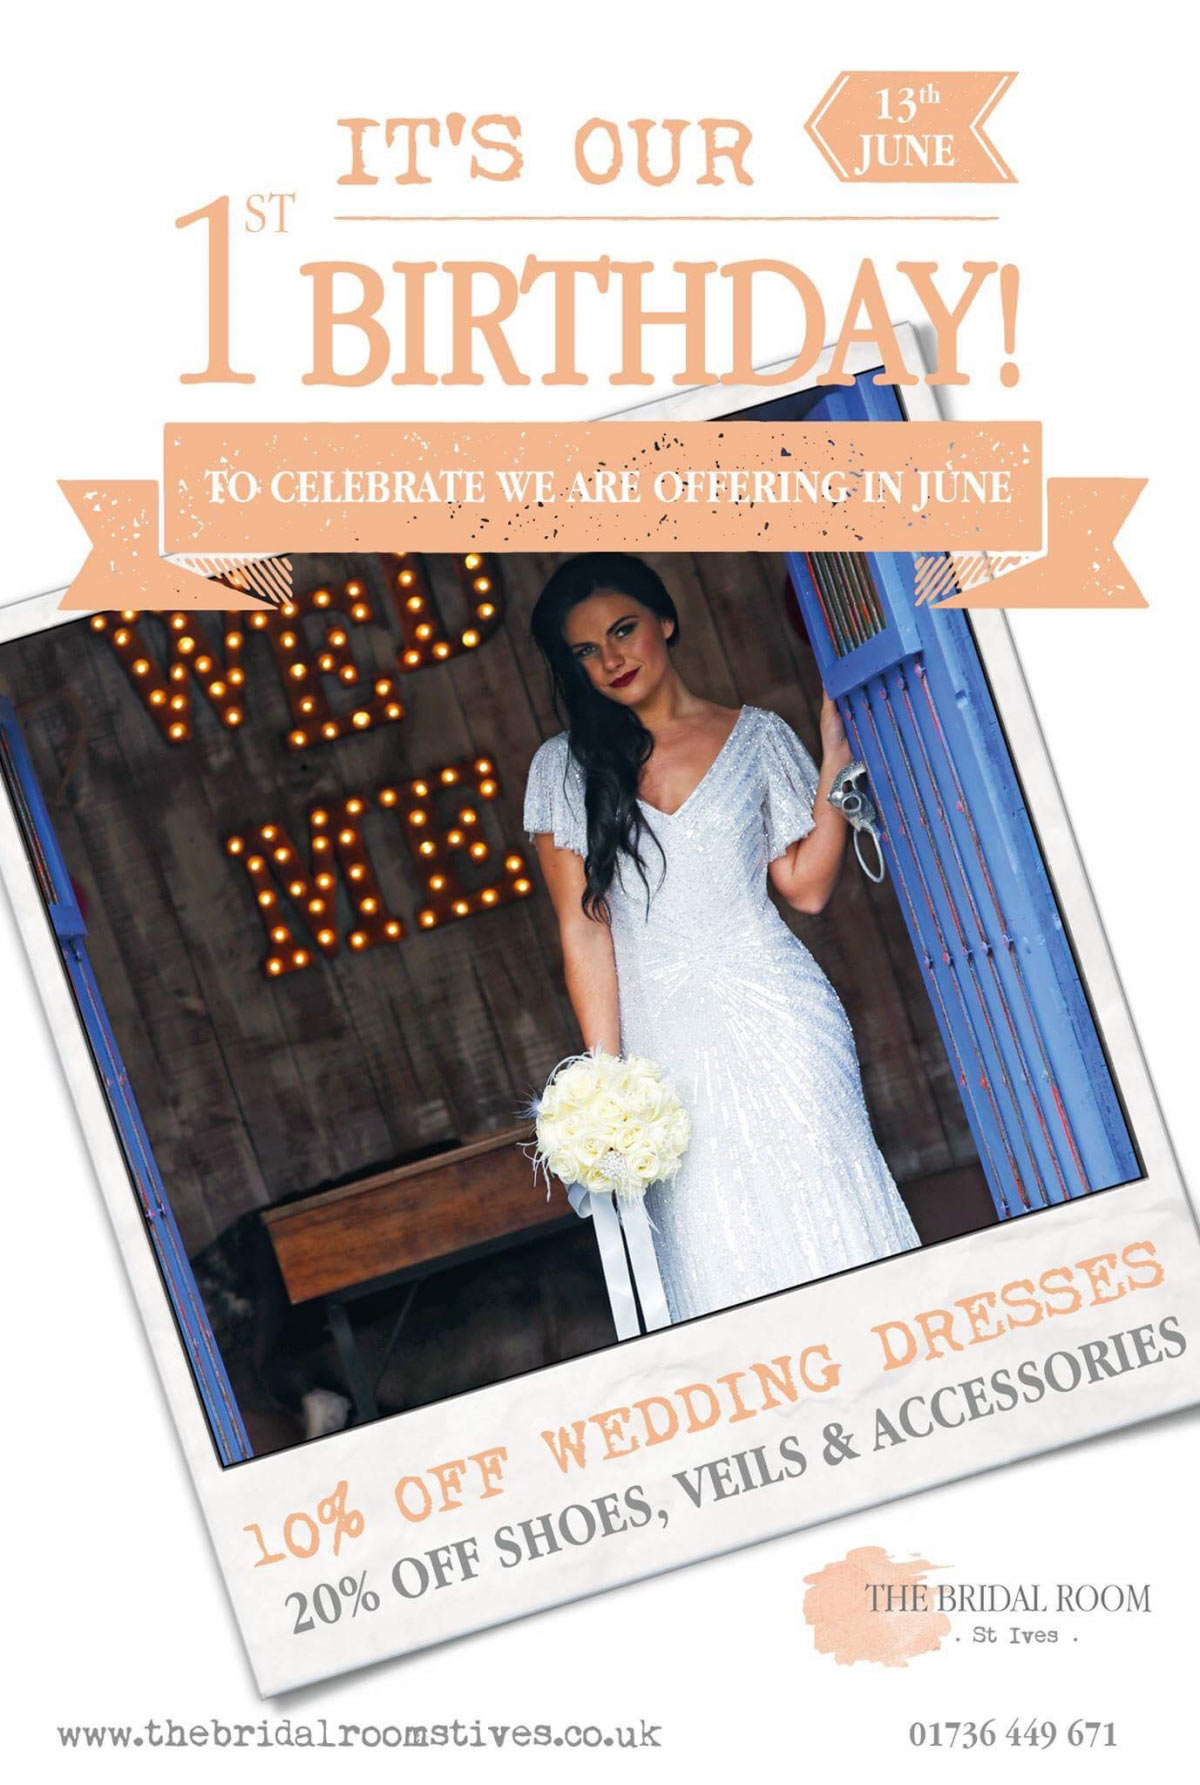 First birthday celebrations for The Bridal Room St Ives